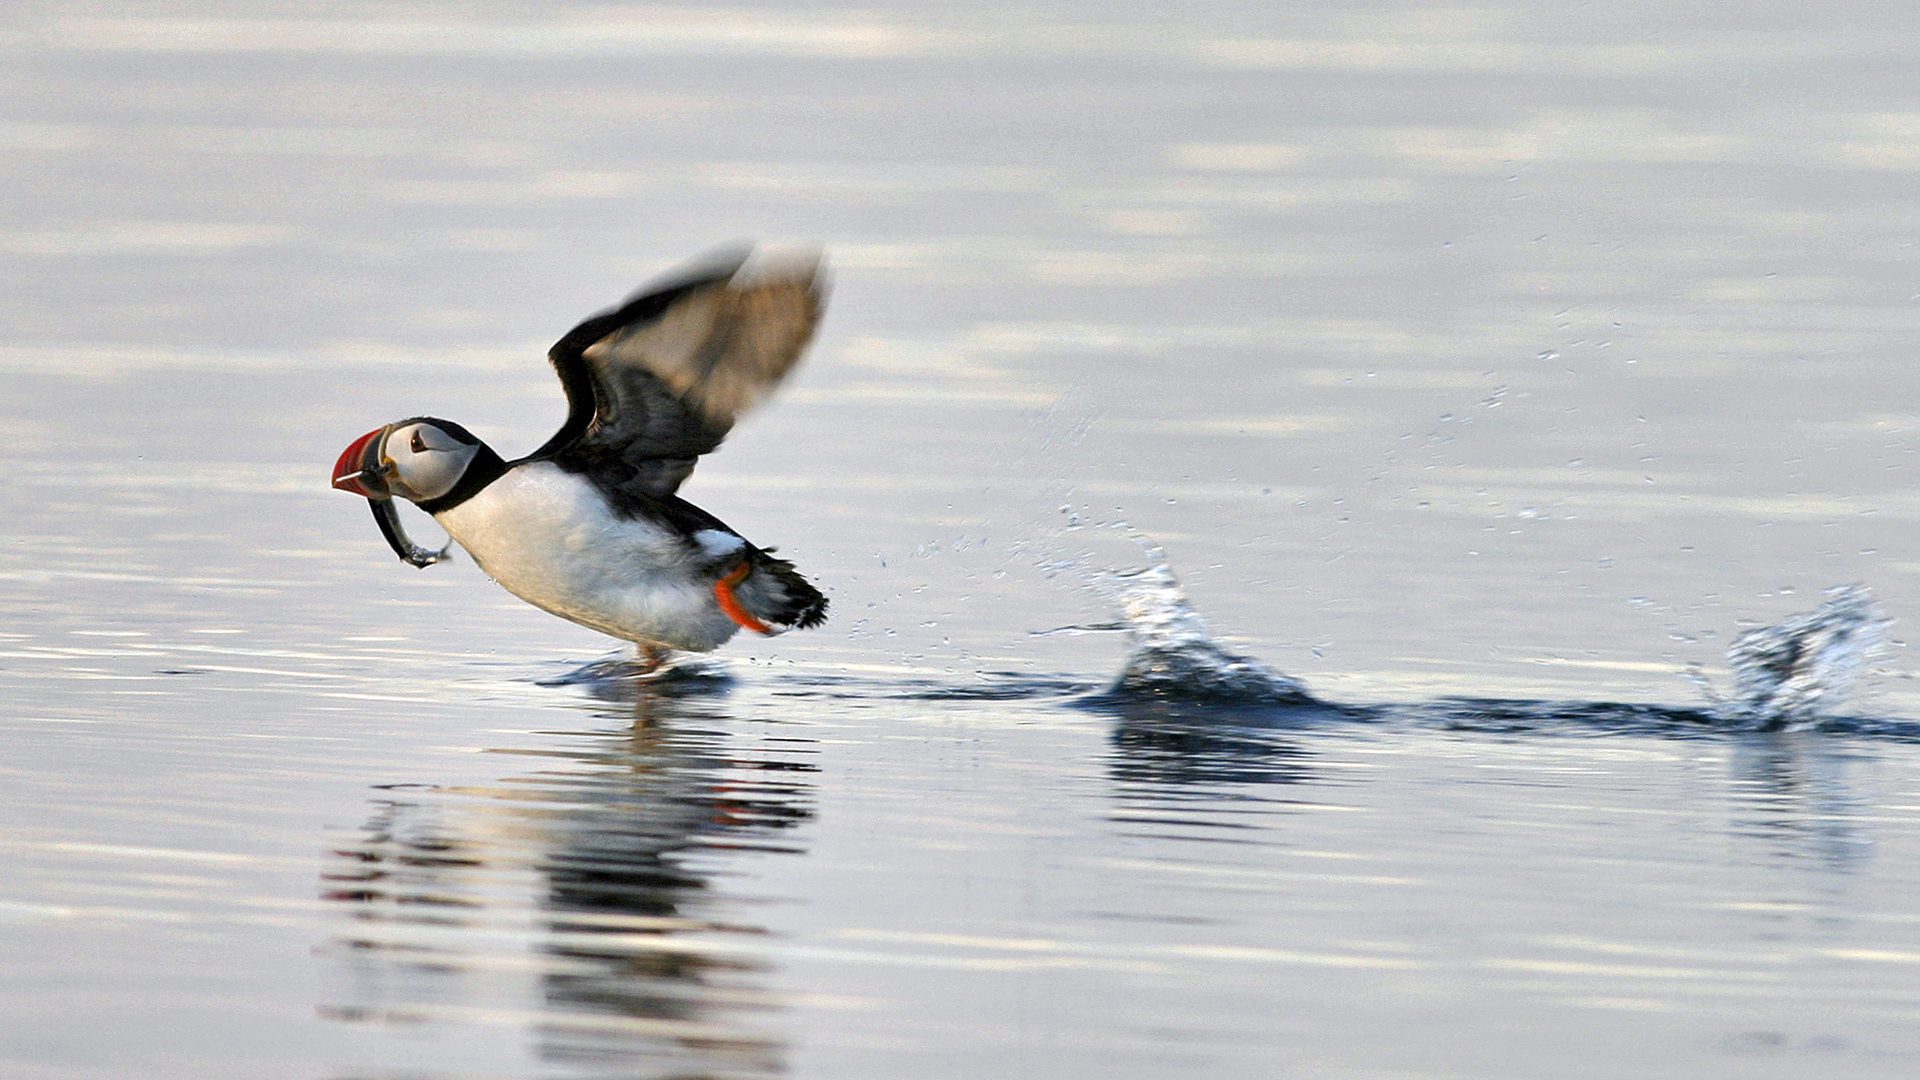 A Puffin taking off from the sea